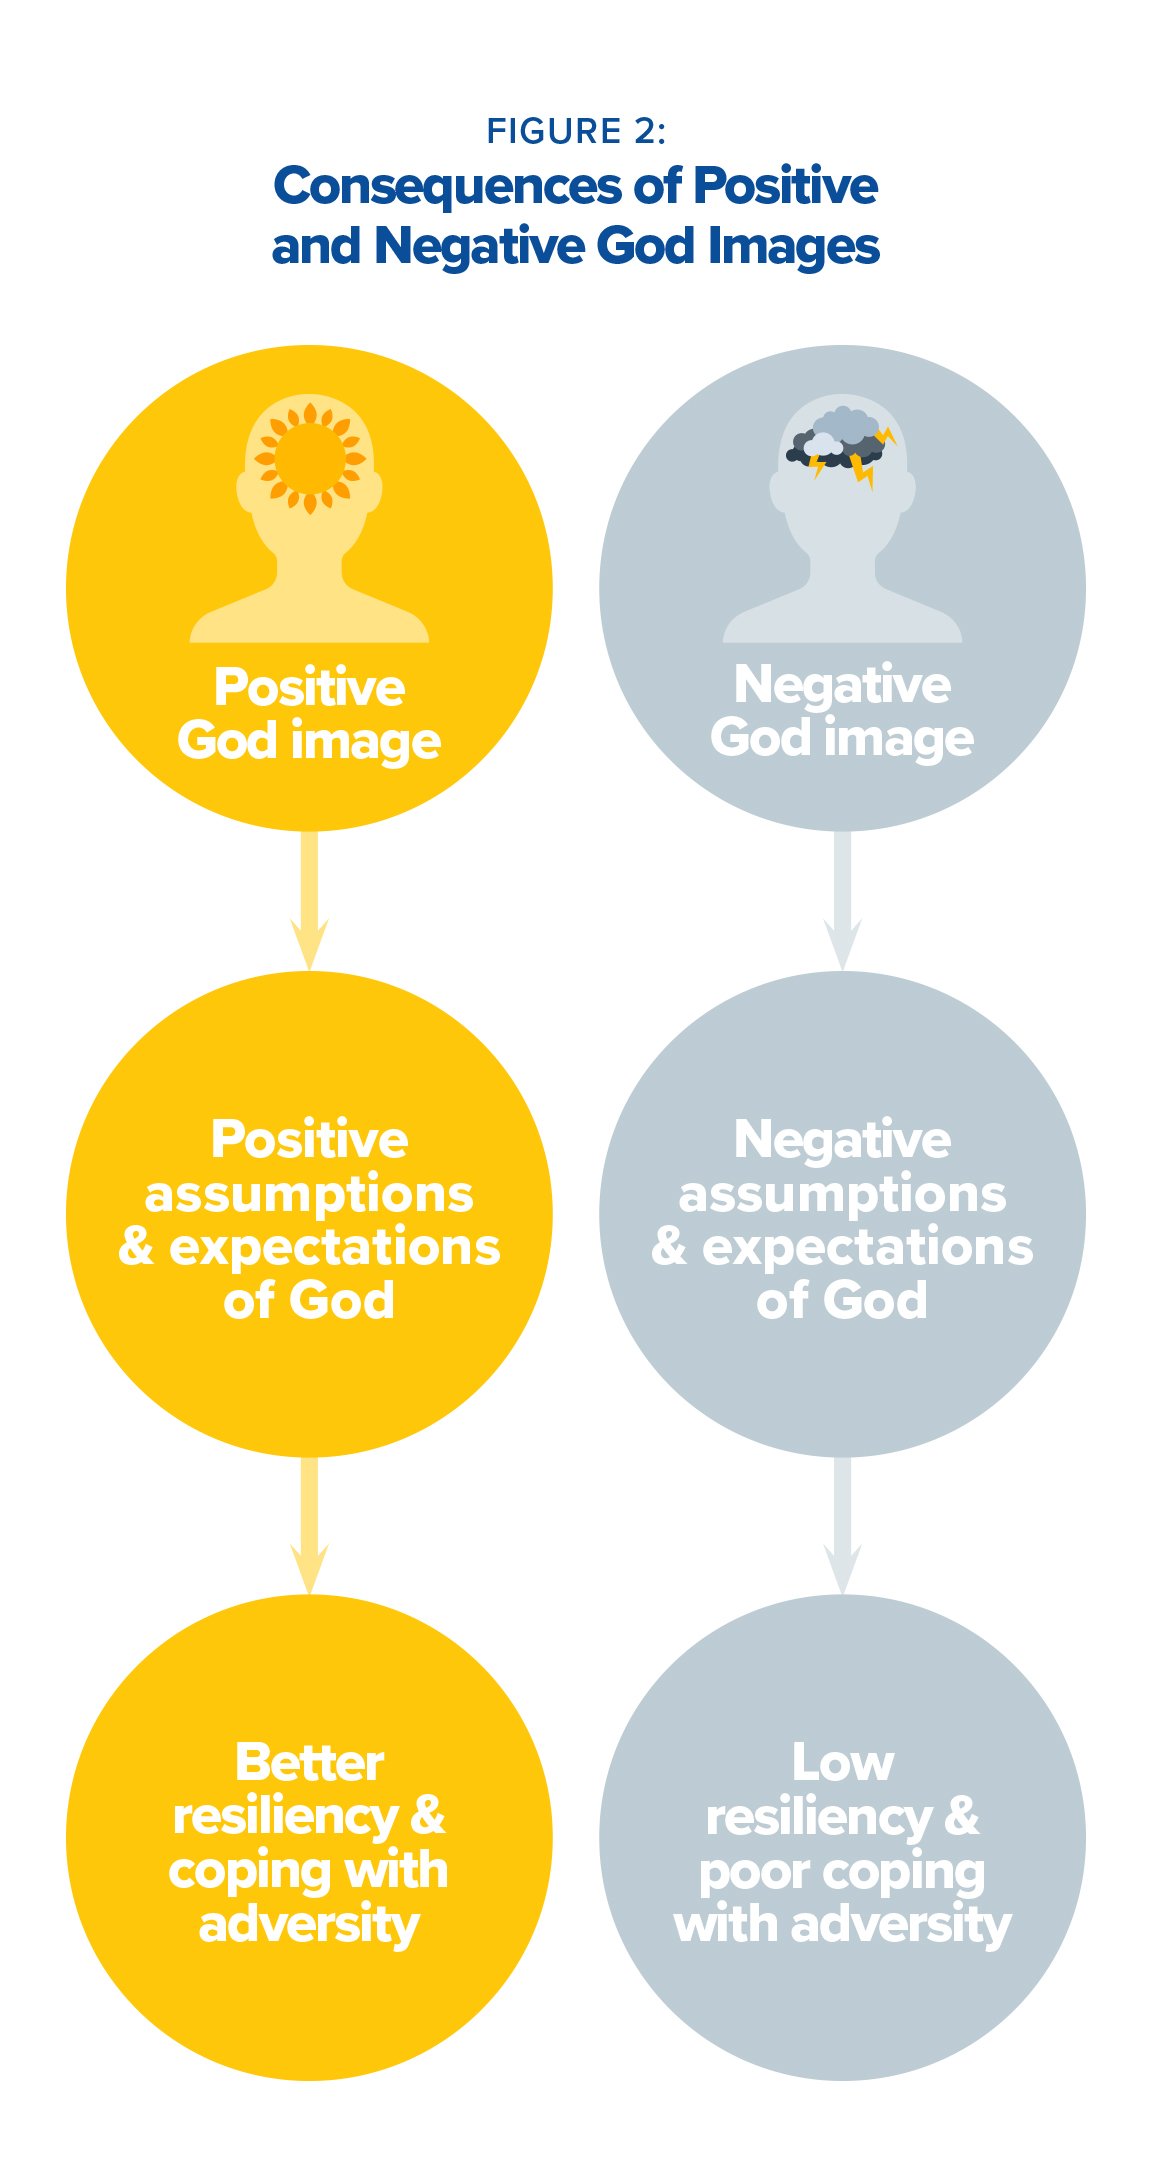 Consequences of Positive and Negative God images